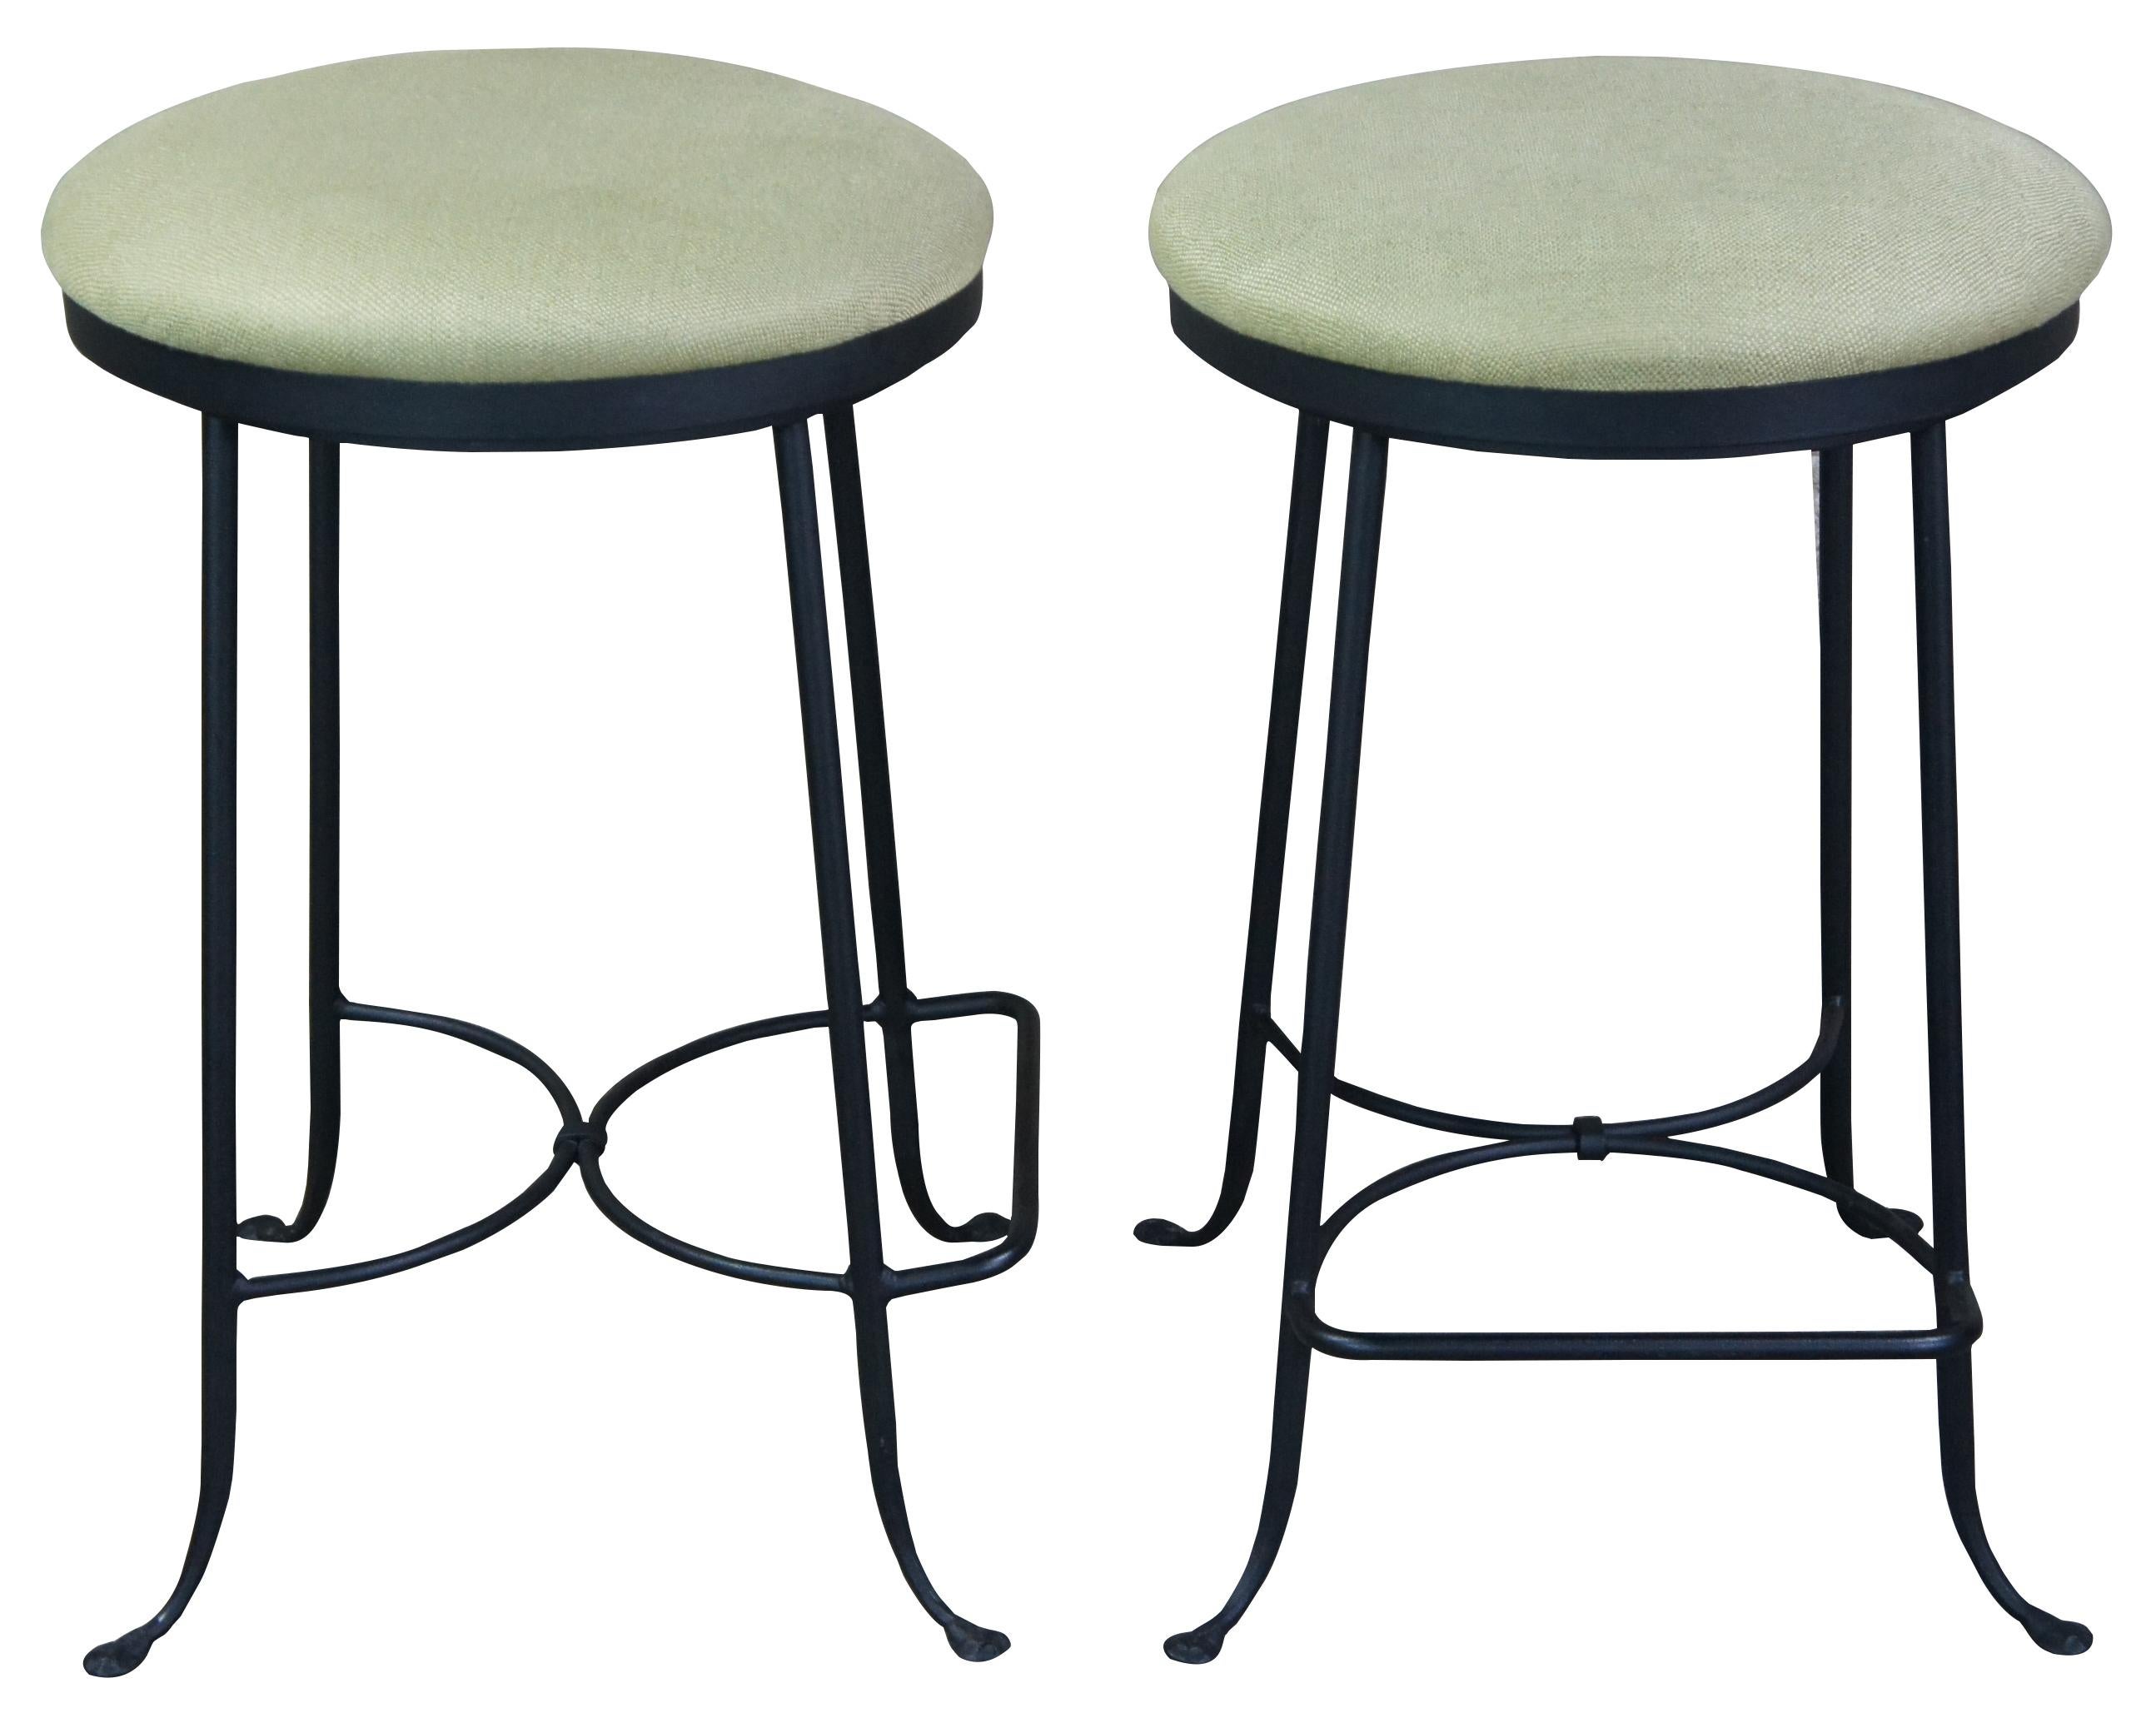 Three vintage Hearthstone Ent., Inc bar or counter stools featuring swivel seat with green upholstery and heavy sturdy wrought iron frame with foot rest. Made in Boone, North Carolina. Measure: 27